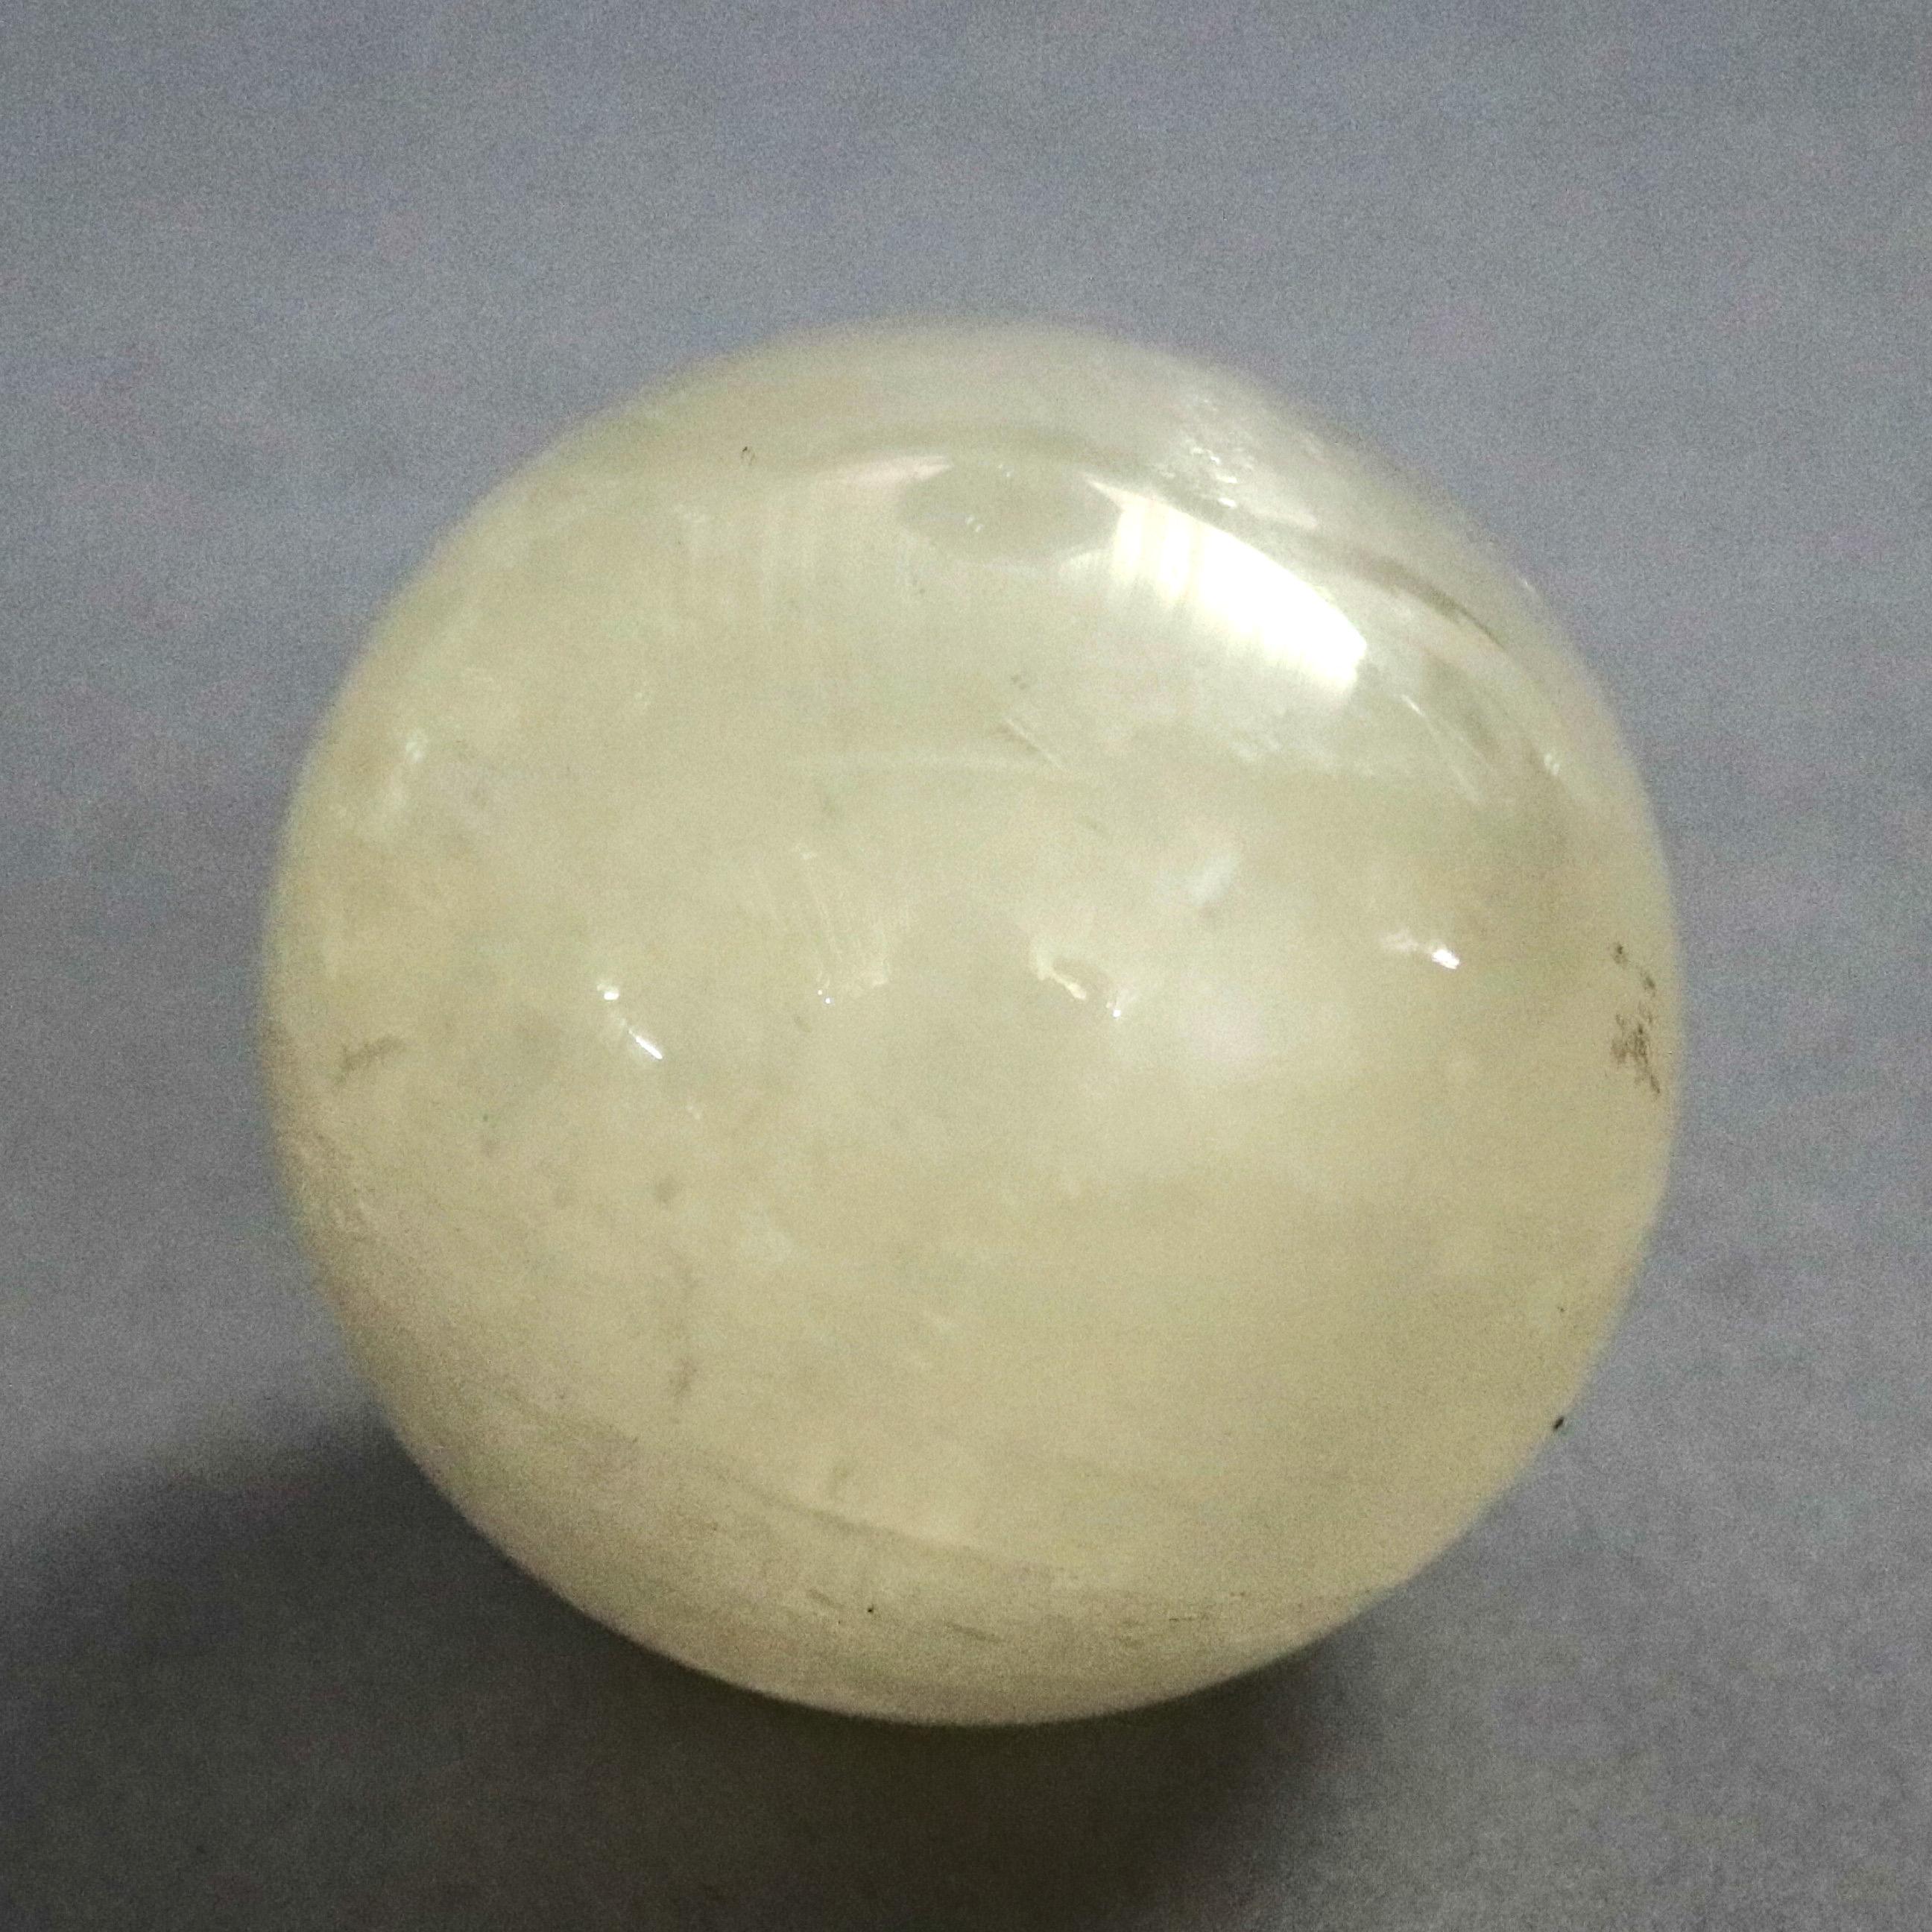 A set of two Chinese jade green and white onyx balls, 20th century

Measures- Jade- 2.13